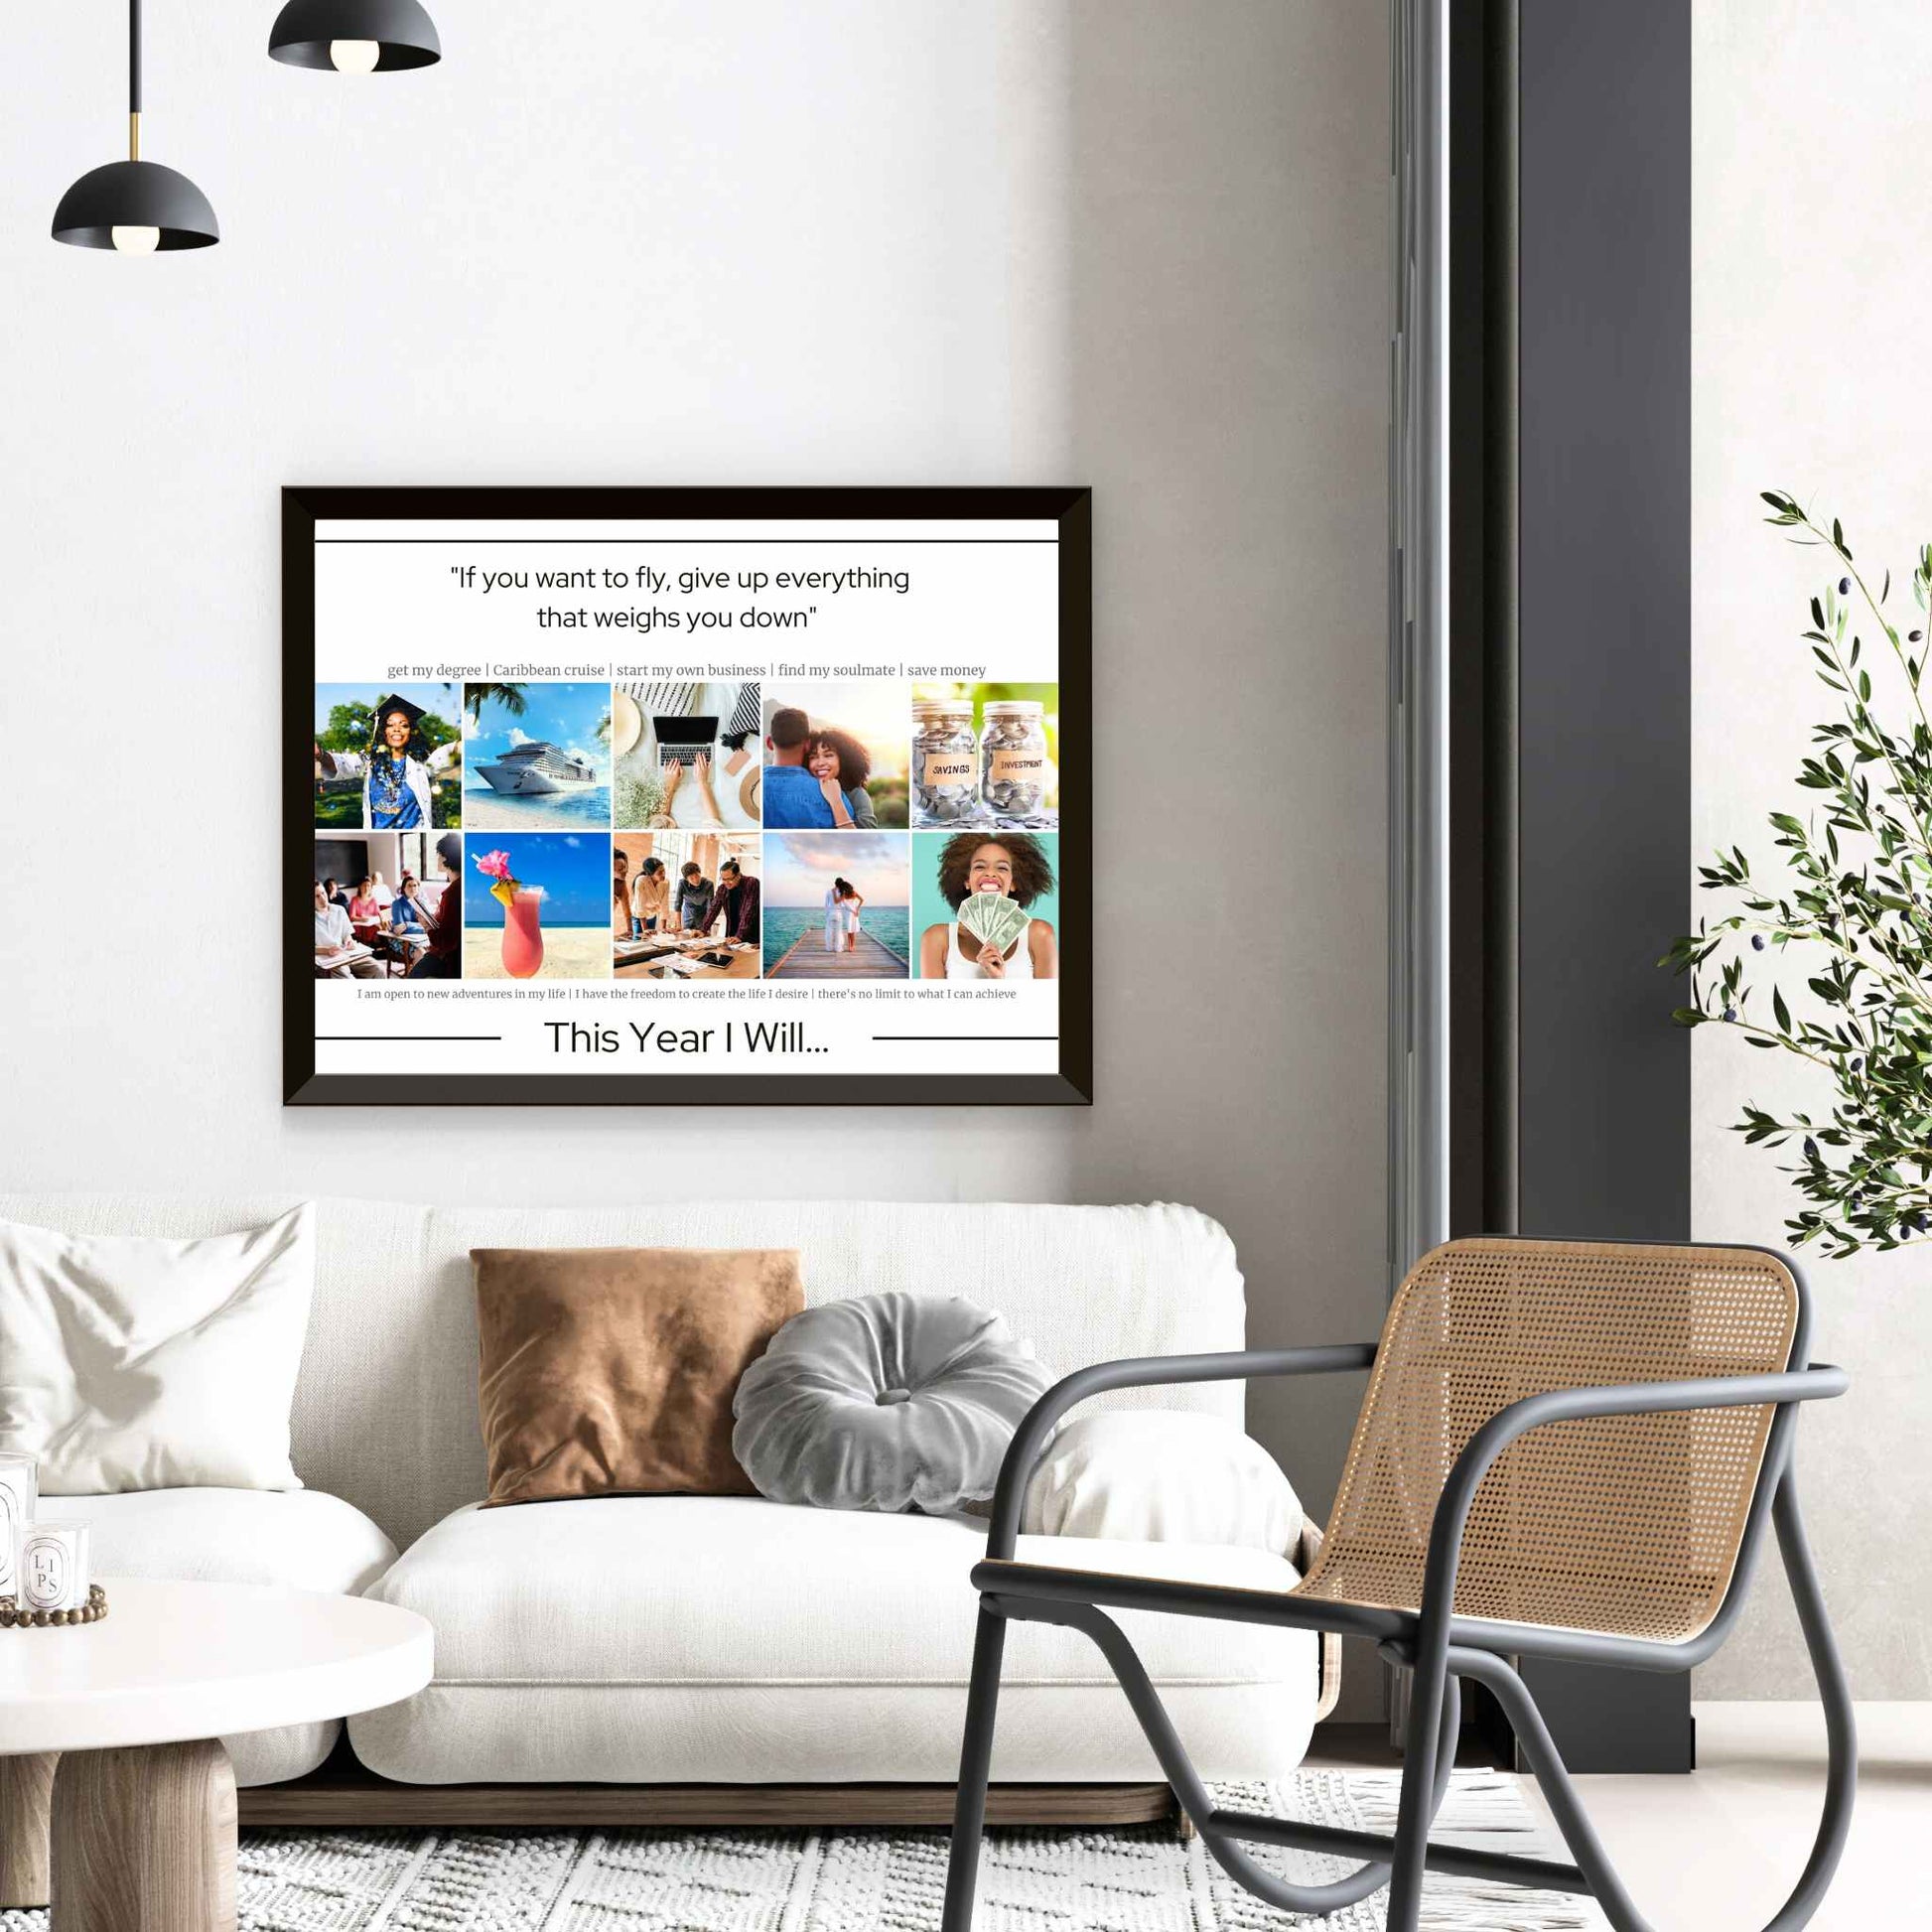 Simple grid collage style vision board design in frame hanging on modern interior wall